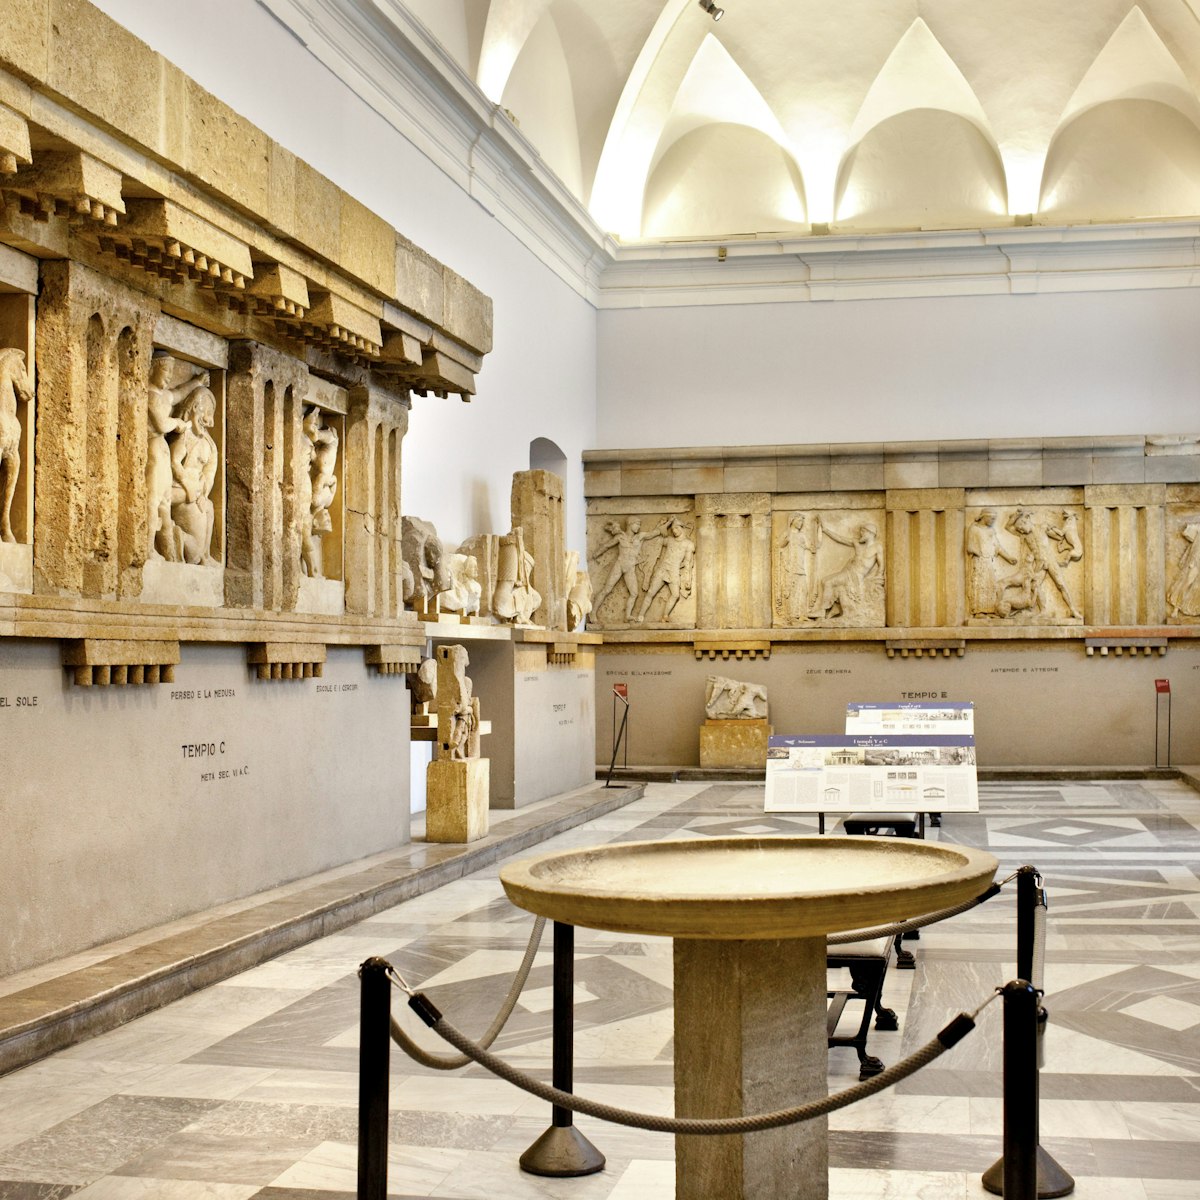 Archeological Museum, Palermo, Sicily, Italy